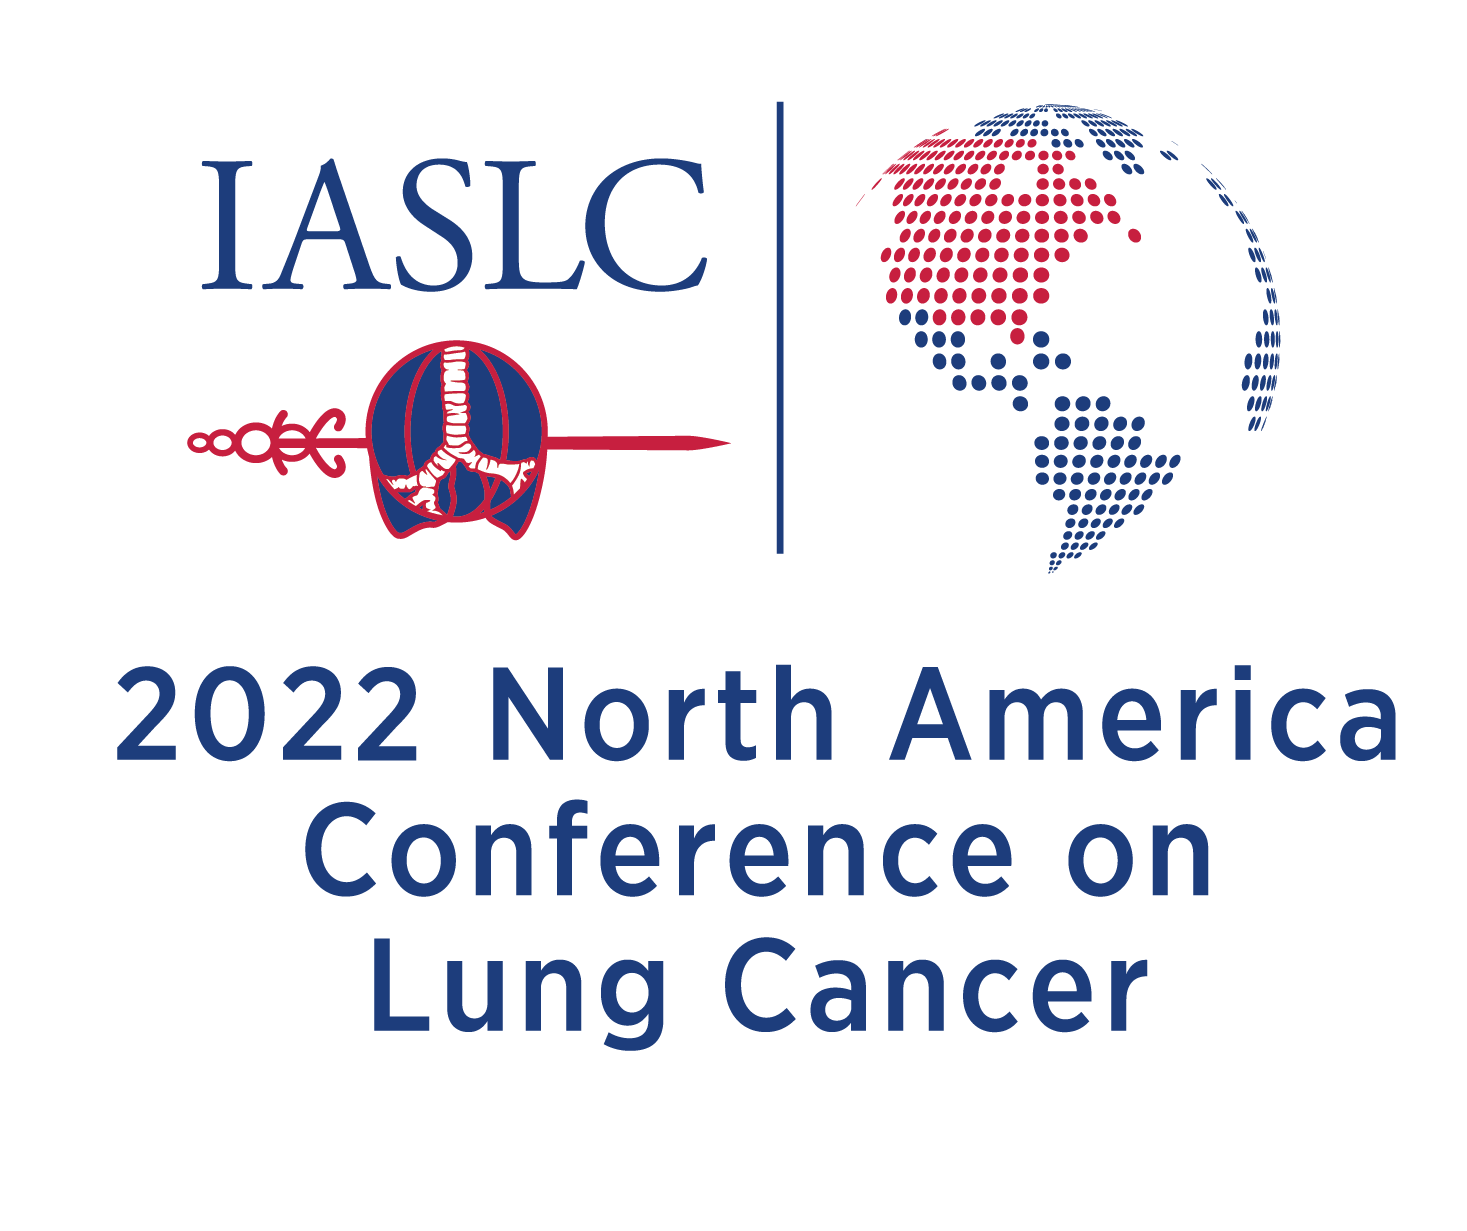 IASLC 2022 North America Conference on Lung Cancer